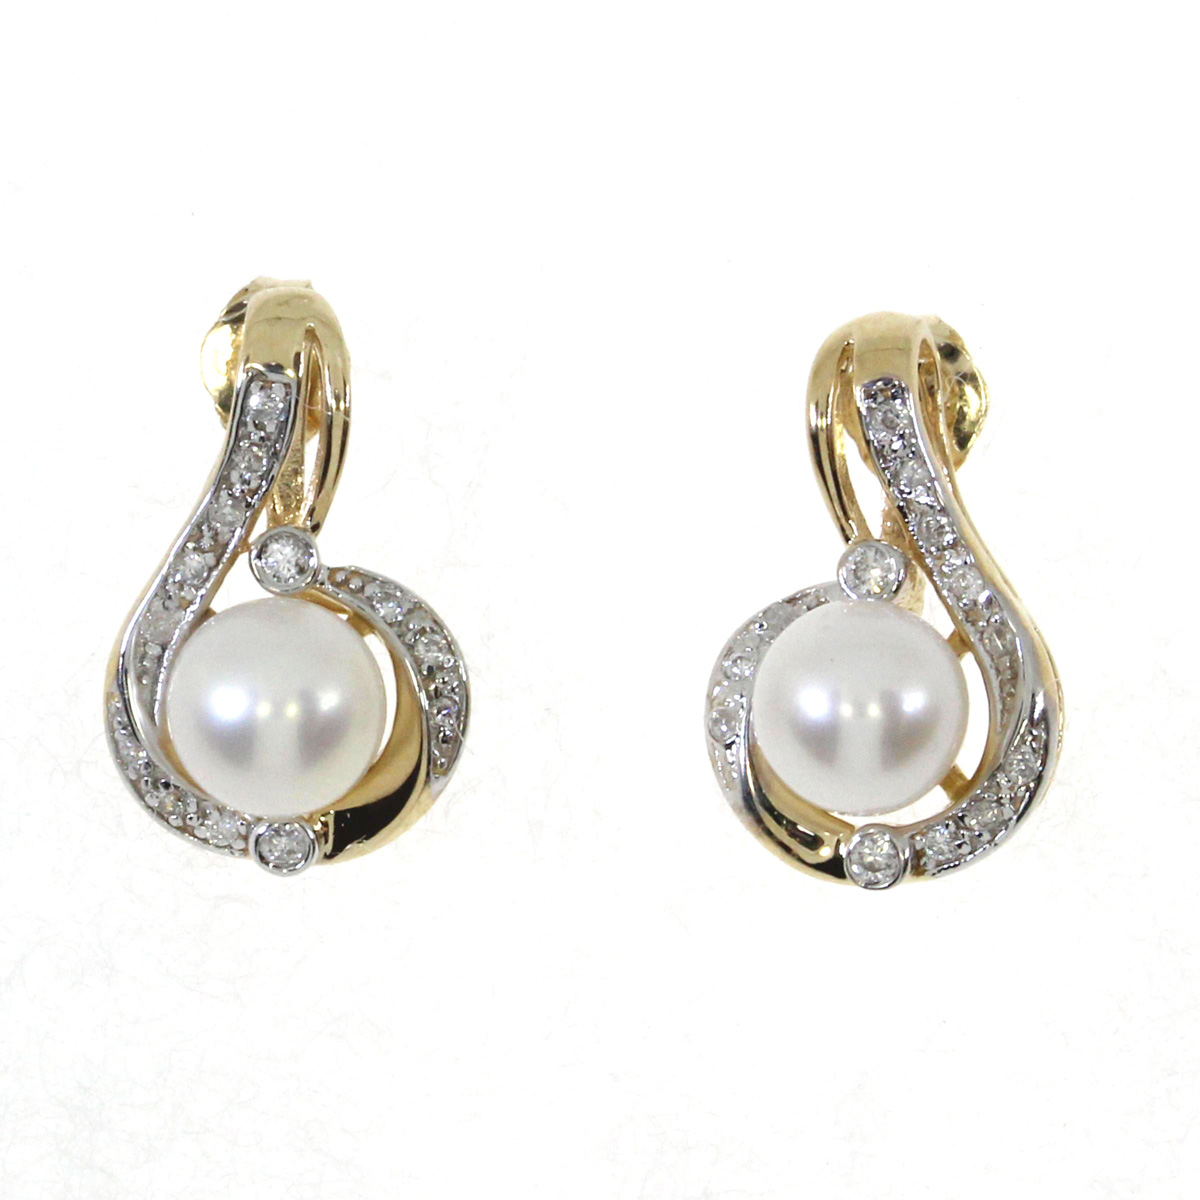 Elegant freshwater 6 mm pearl earrings set in 14k white gold with .13 total ct diamonds.